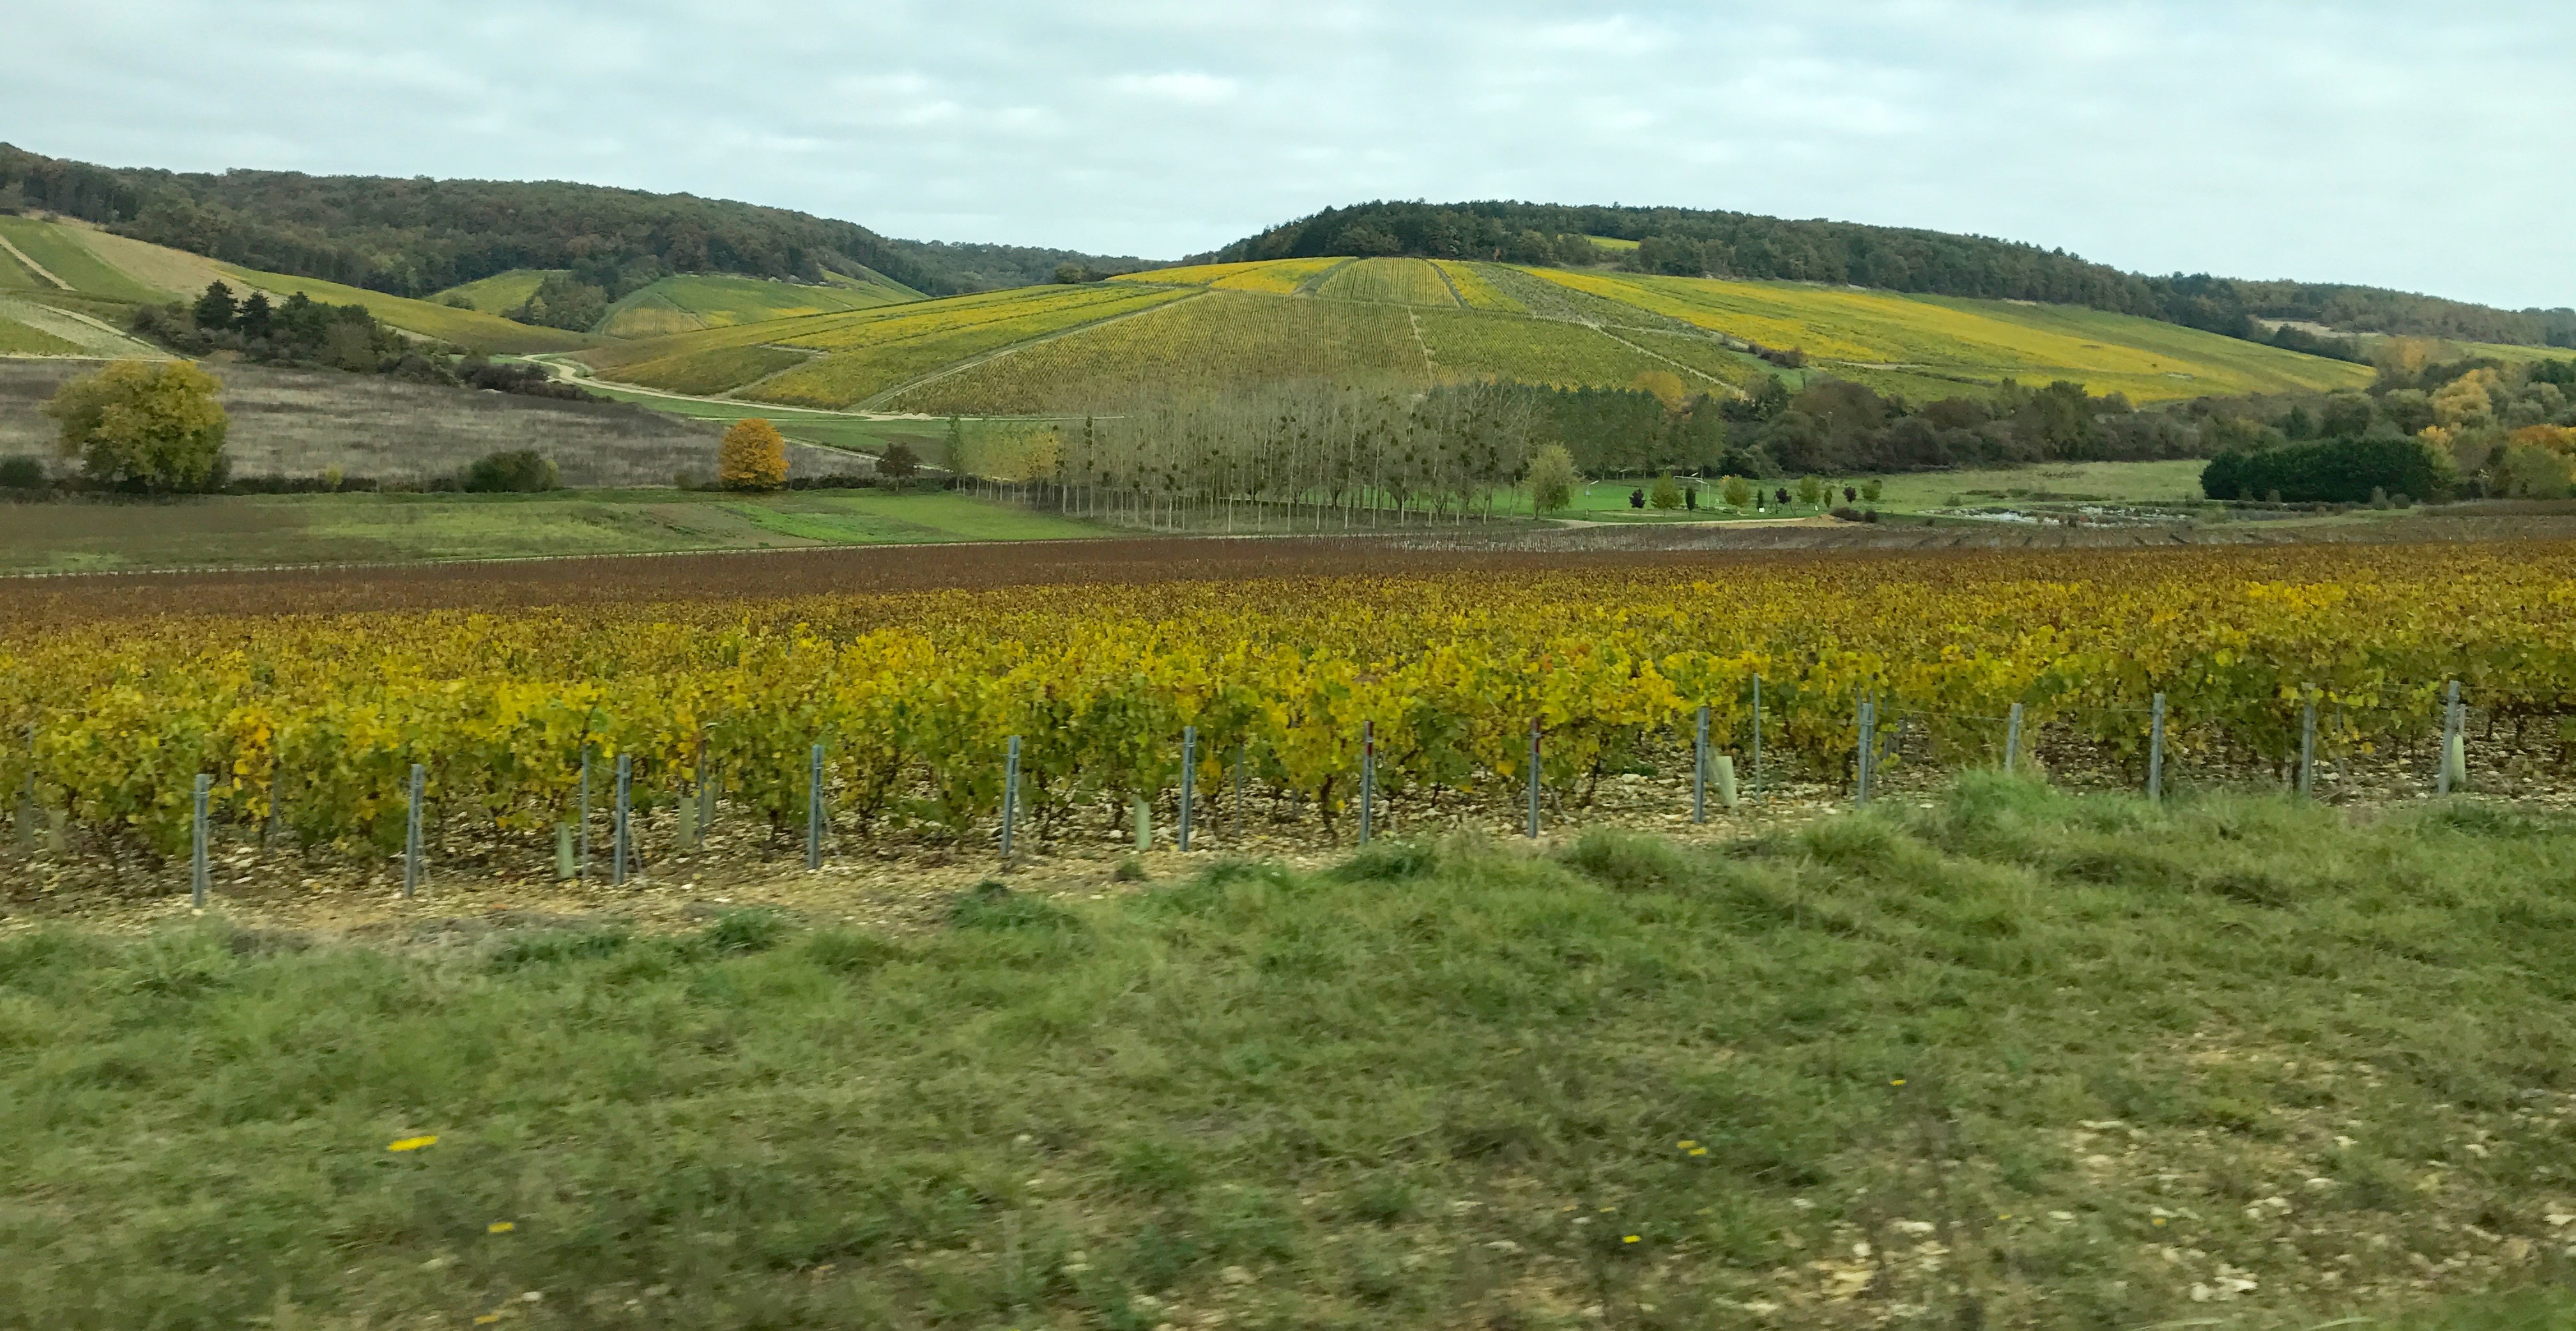 Rolling hills of Champagne, with vineyards of Chardonnay, Pinot Noir & Pinot Meunier.